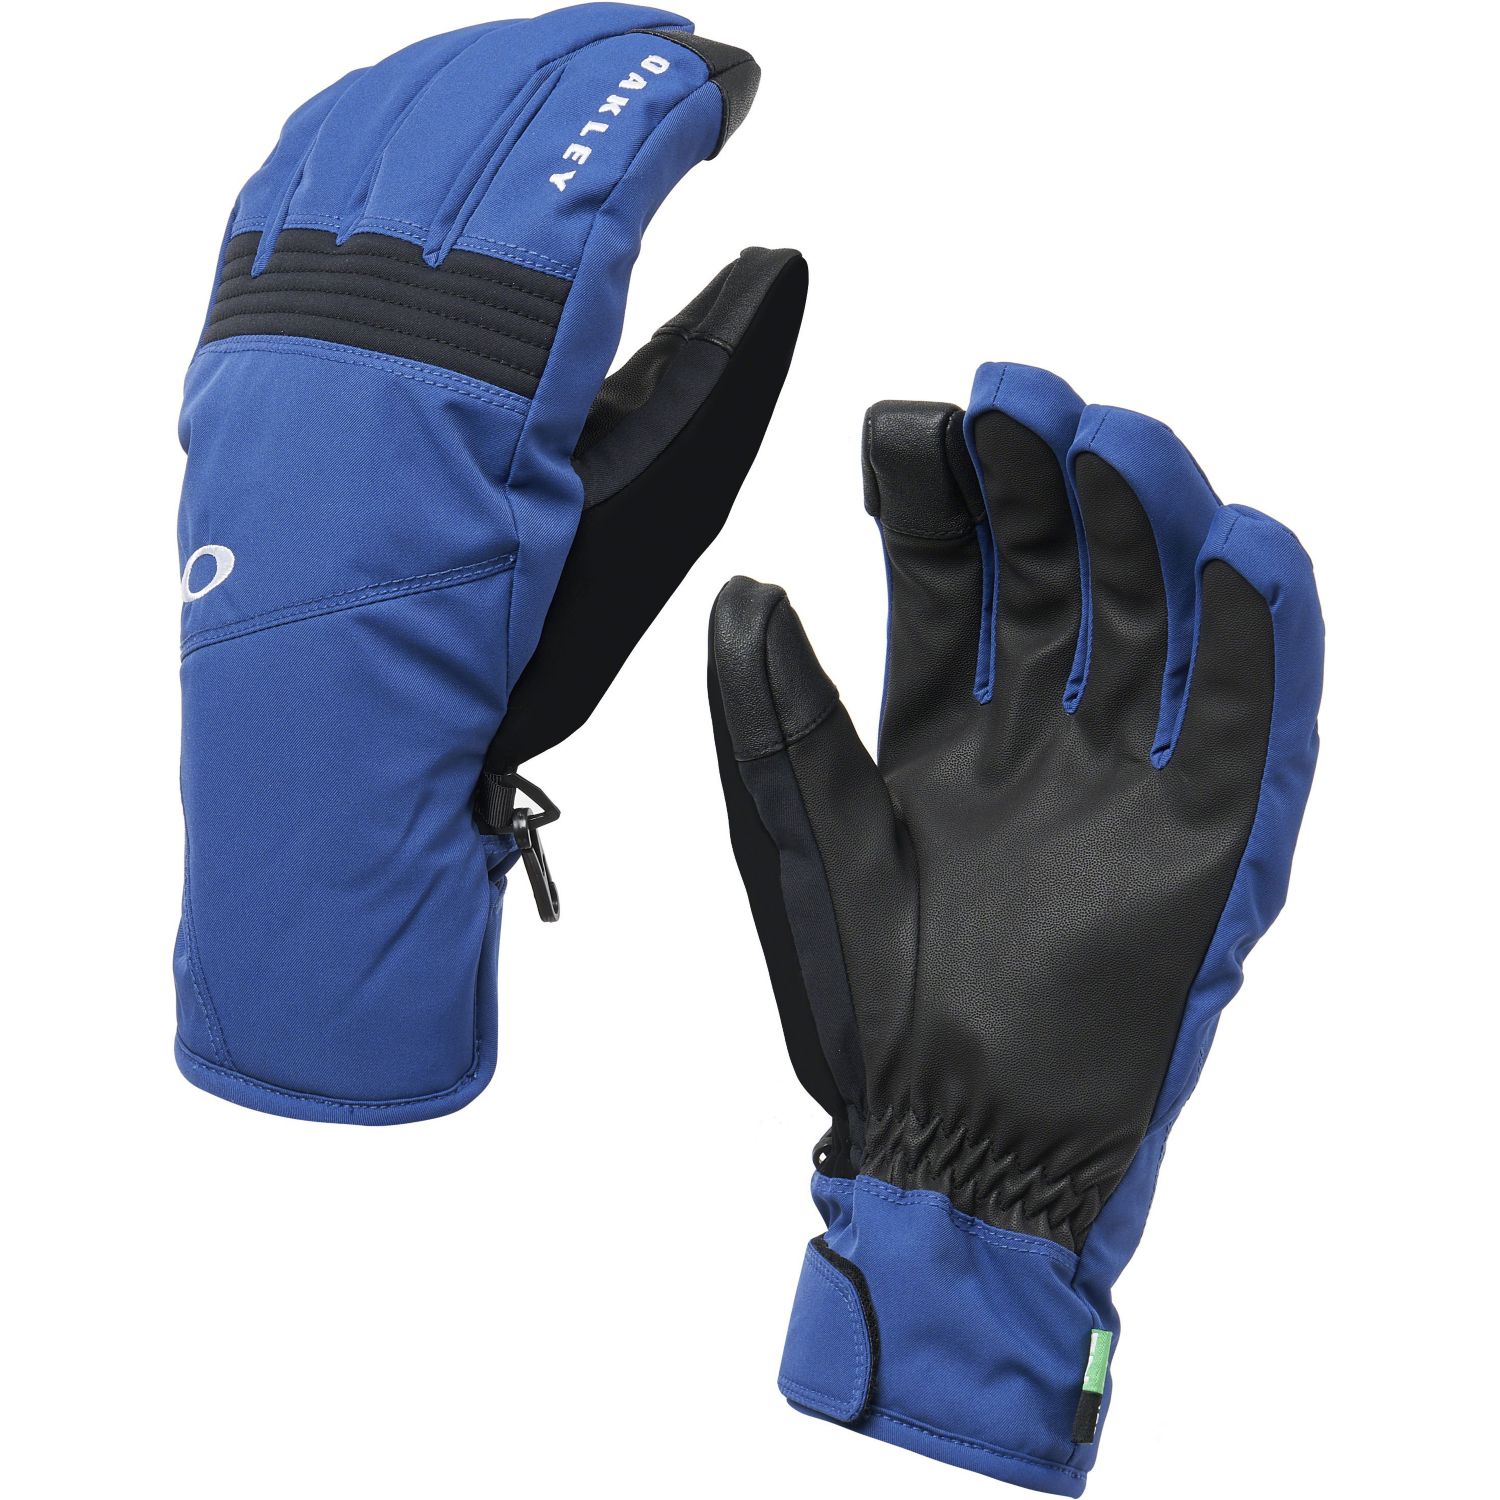 Roundhouse Short Glove 2.5